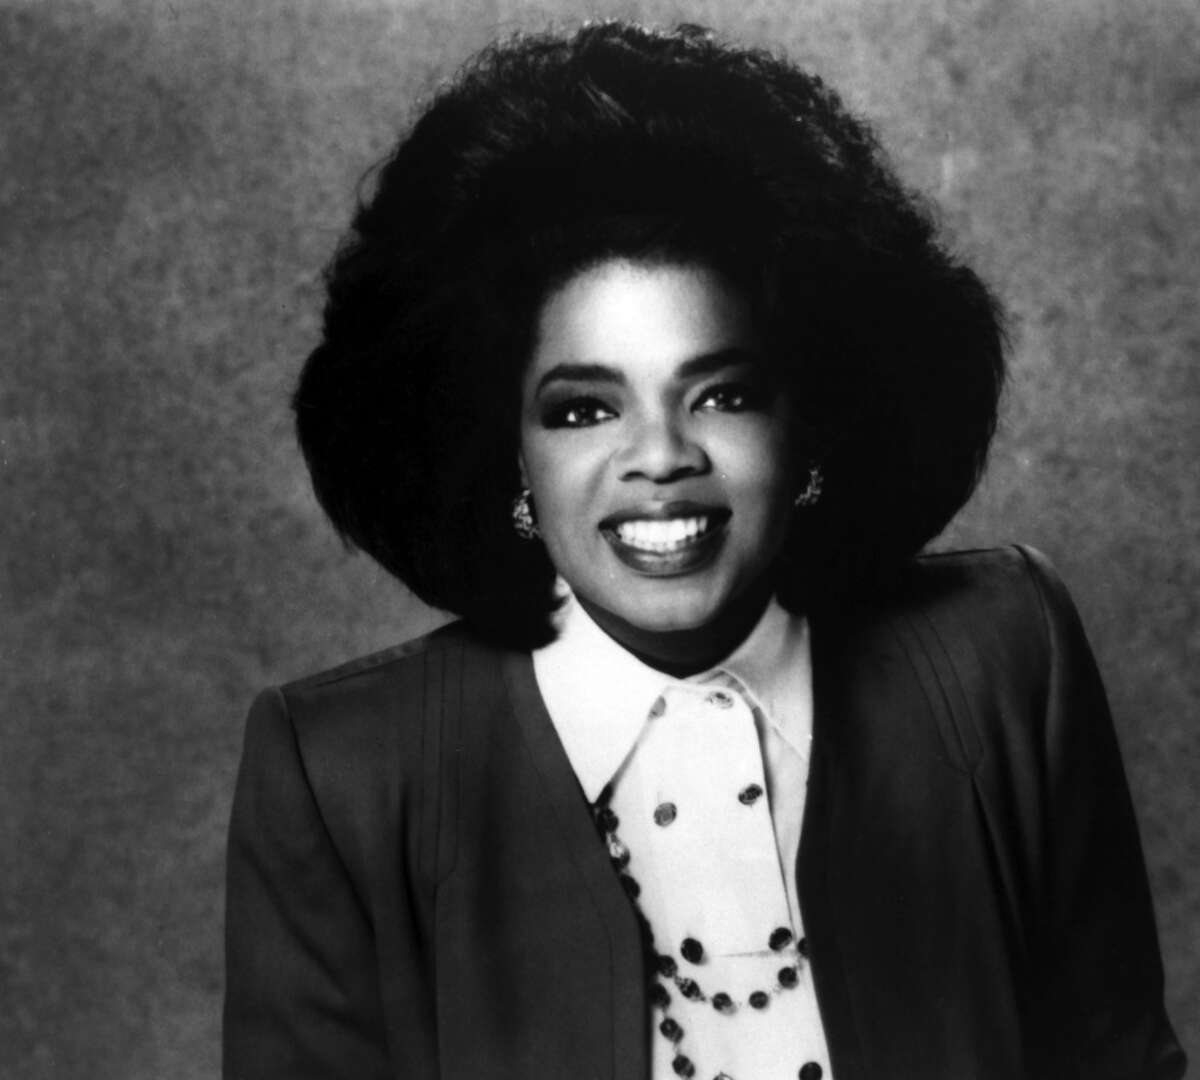 Who'd have thought that this smiling 1970s TV host would become a media tsunami and spiritual leader with die-hard fans across the world? As Oprah Winfrey turns 60 this Wednesday, we take a look back at her career.